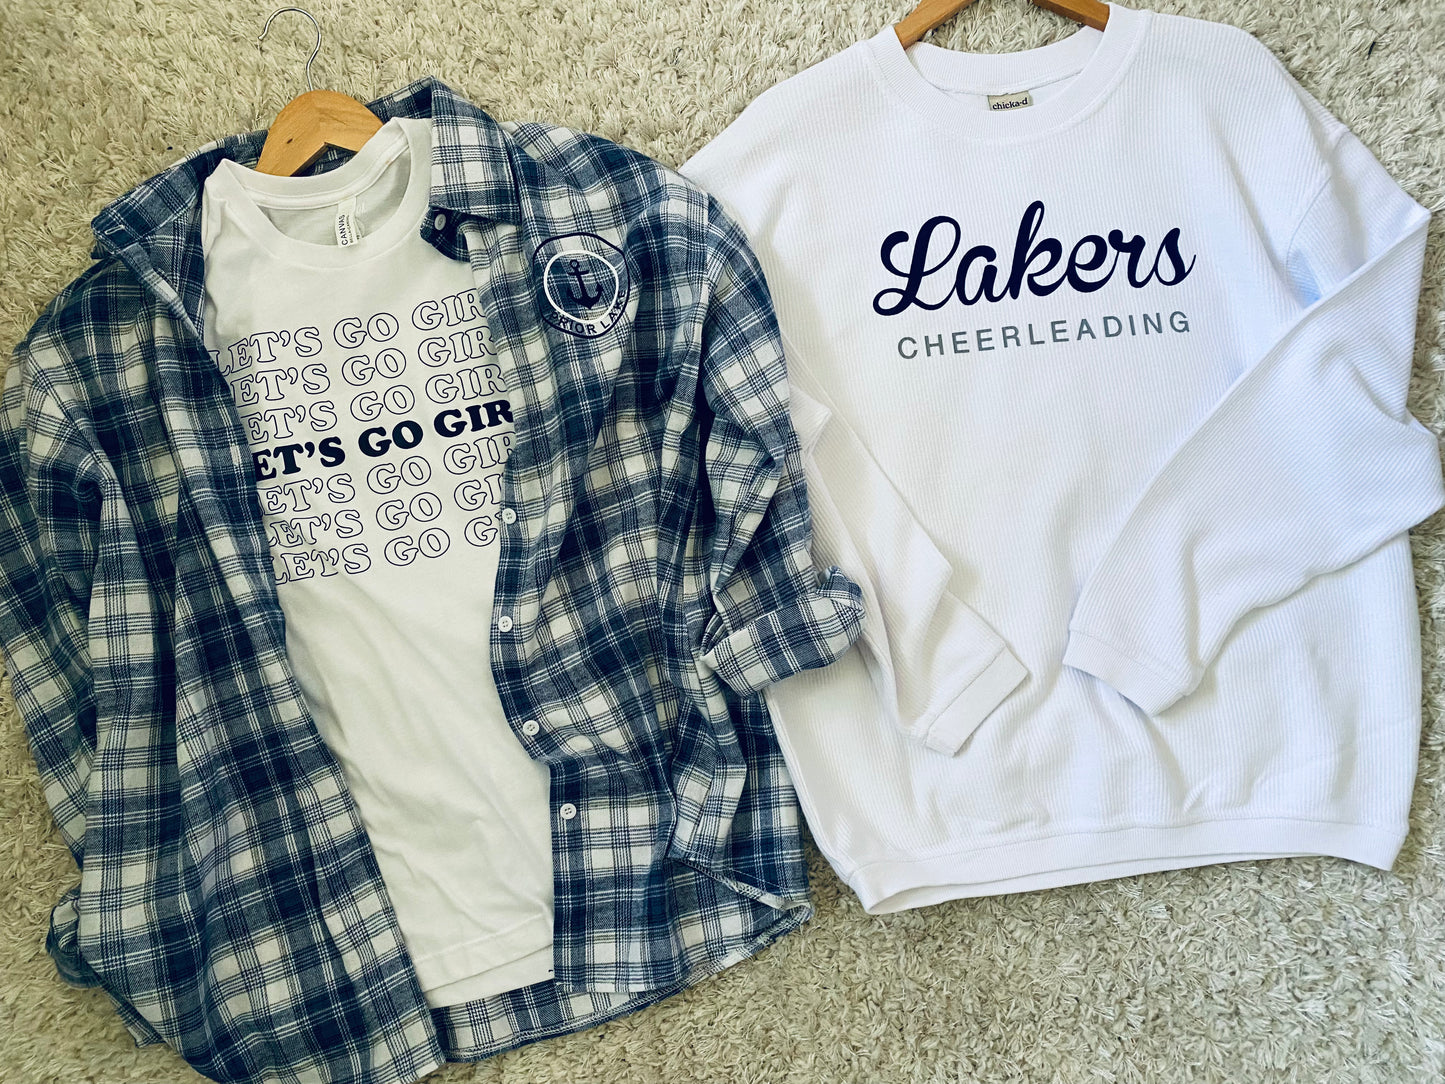 Pl cheer Tee-  Let’s go